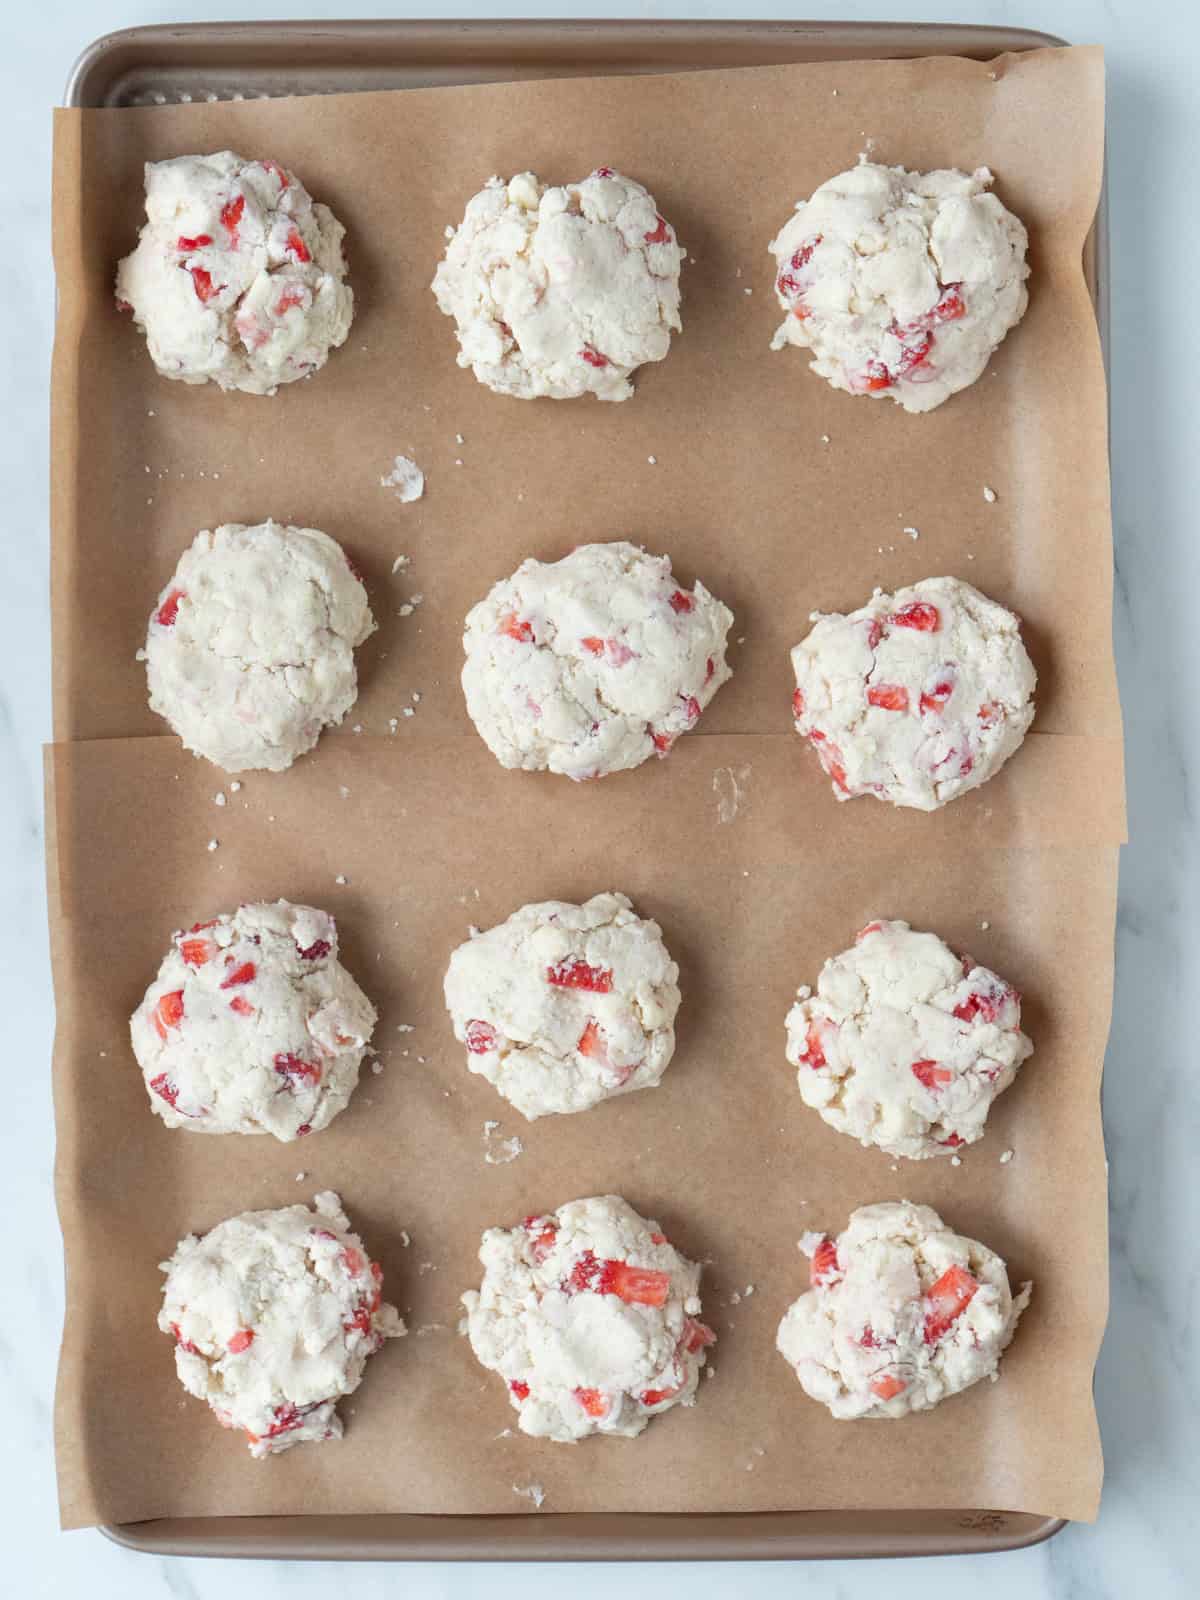 A baking sheet lined with parchment paper and strawberry white chocolate scone dough placed on it as 12 mounds, ready to bake.